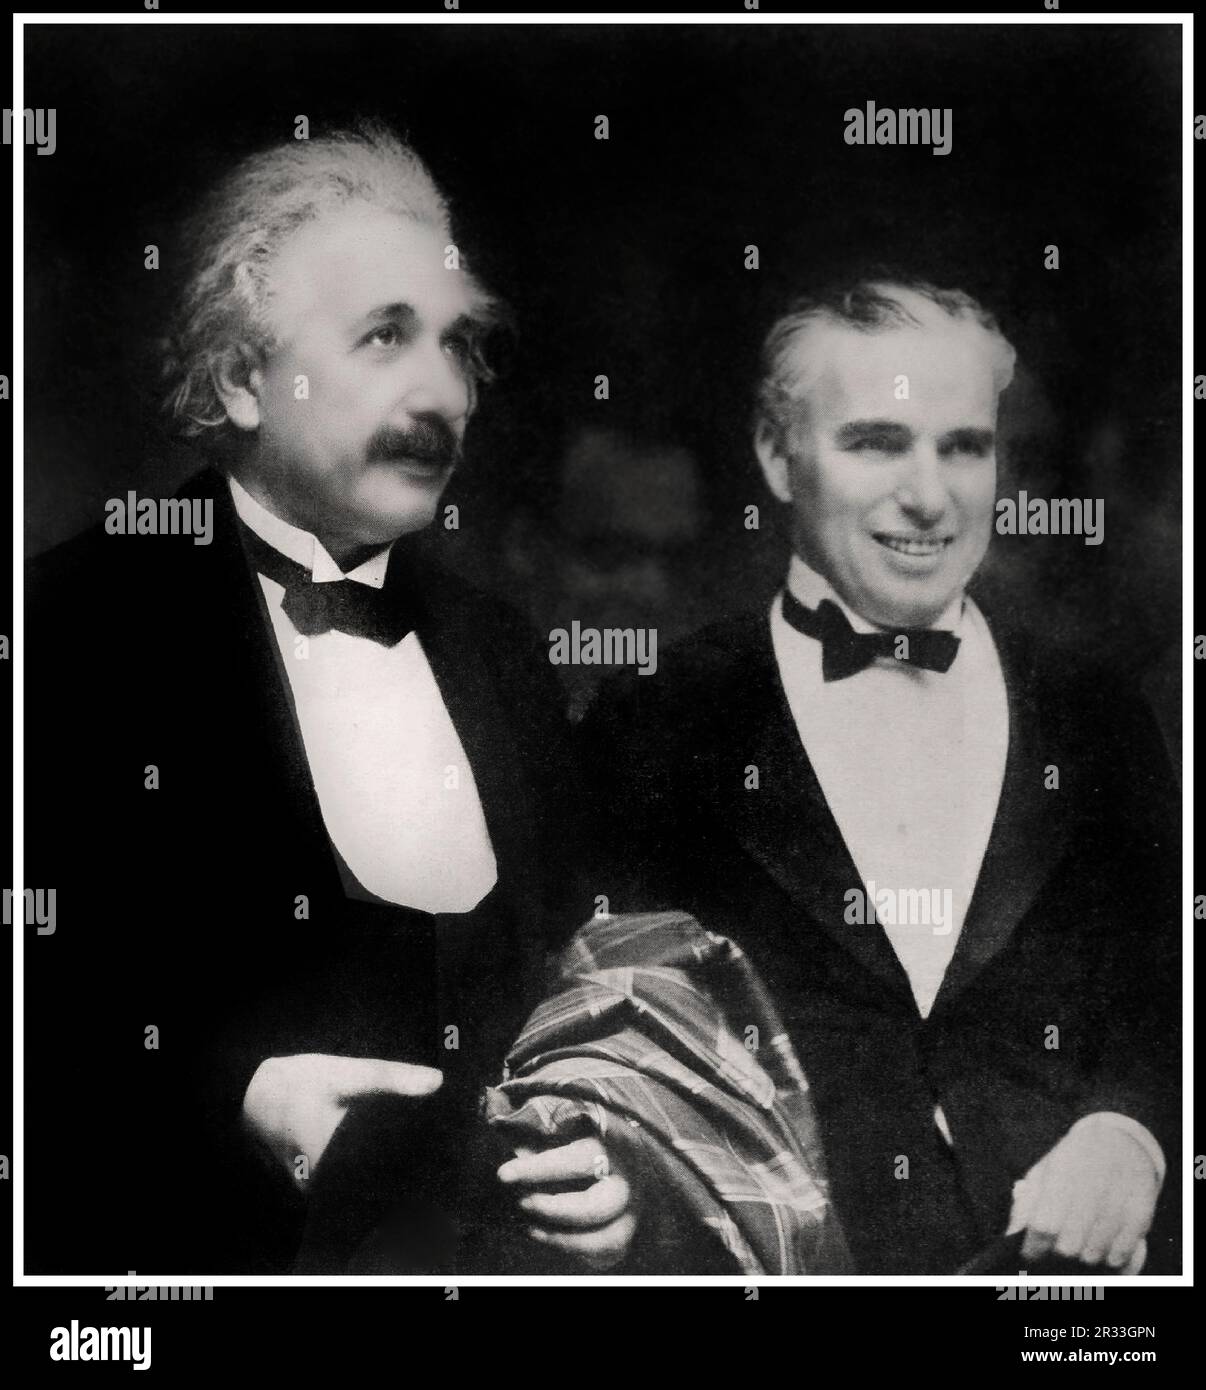 Albert Einstein with Charlie Chaplin at the 1931 premiere of City Lights.  City Lights is a 1931 American silent romantic comedy-drama film written, produced, directed by, and starring Charlie Chaplin. The story follows the misadventures of Chaplin's Tramp as he falls in love with a blind girl (Virginia Cherrill) and develops a turbulent friendship with an alcoholic millionaire (Harry Myers). Stock Photo